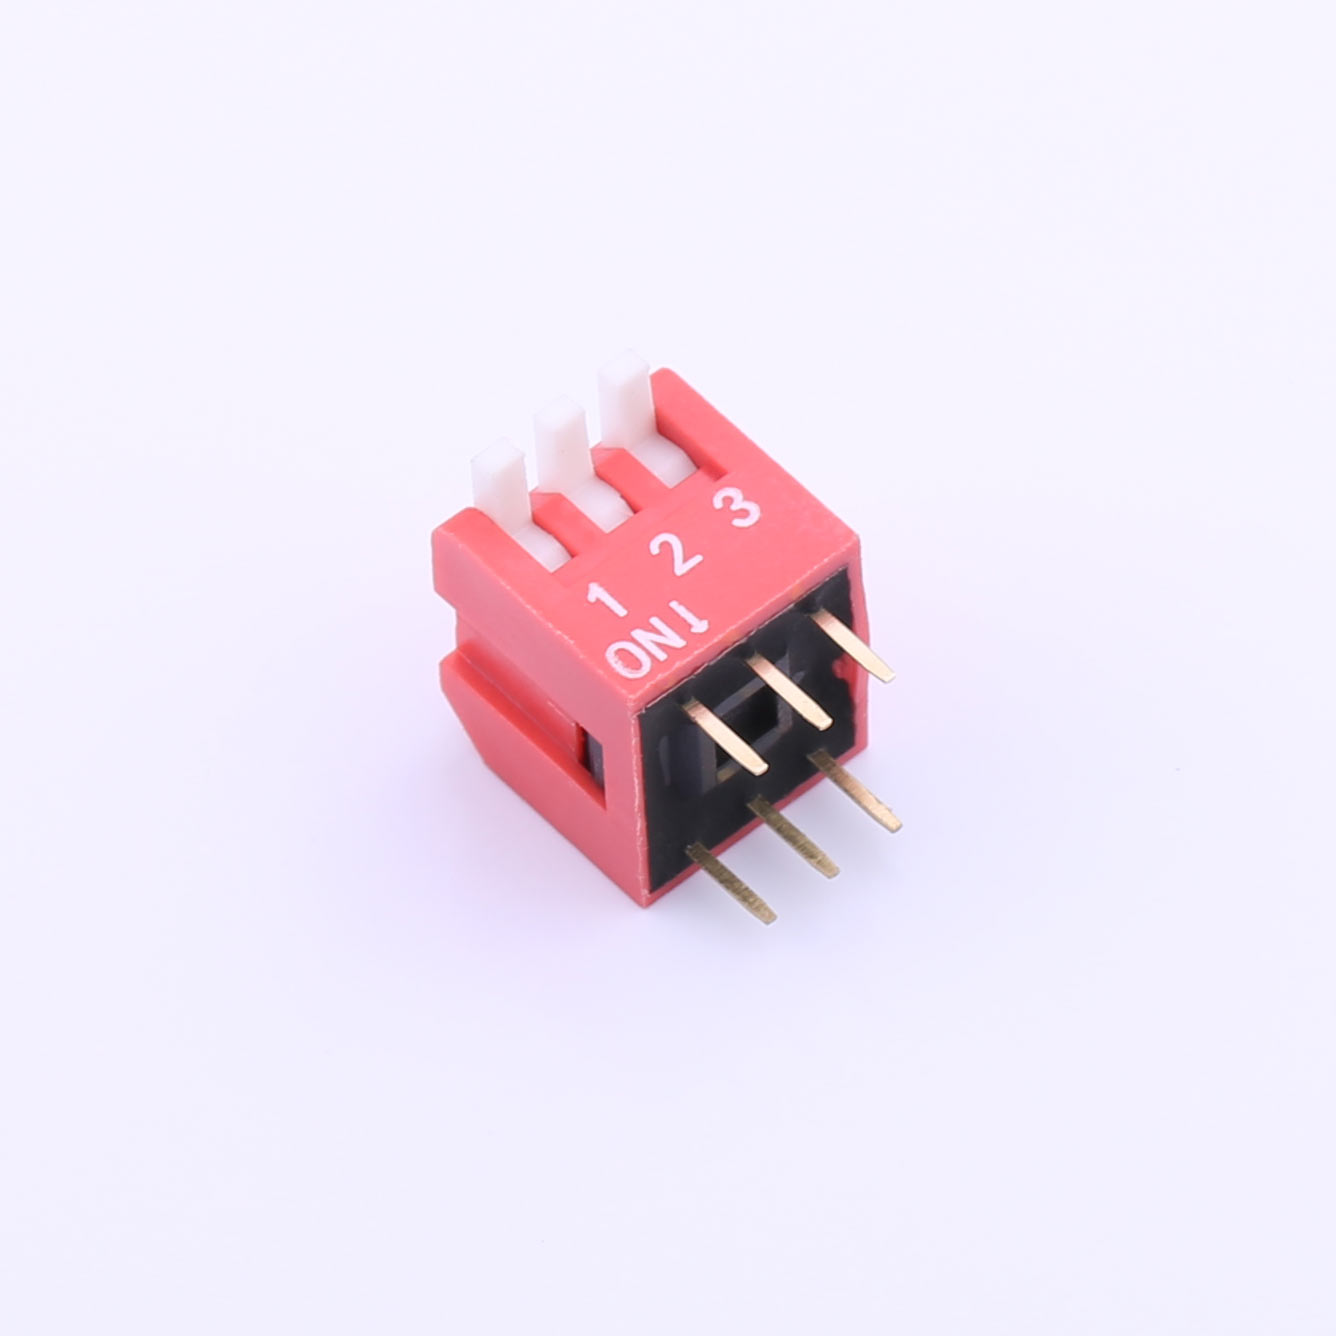 Kinghelm Pitch 2.54mm 3 Positions Red Dip Switch 100mA 24V - KH-1002-CB2.54-3P